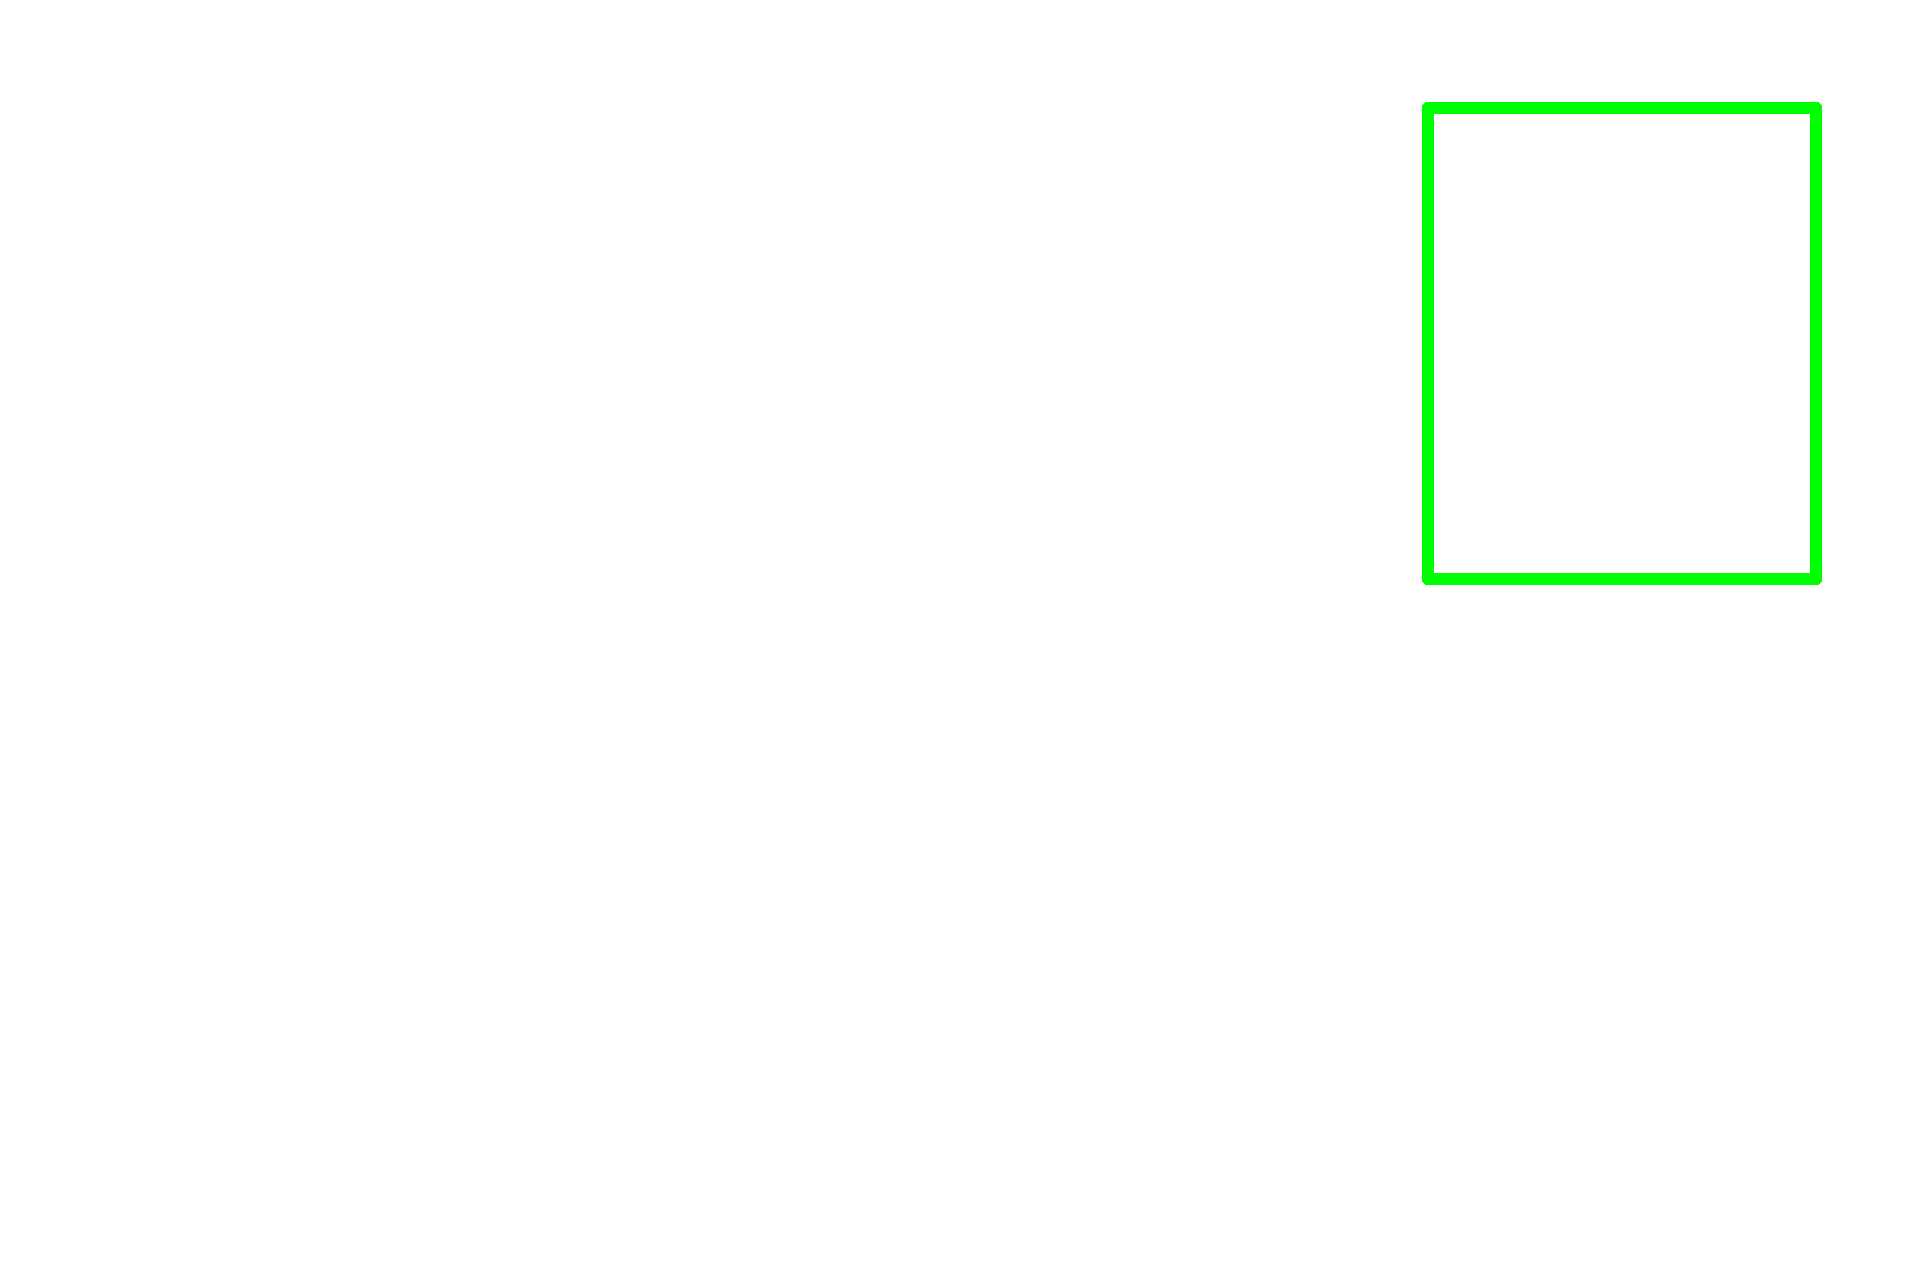 Next image <p>The next image is similar to the area outlined by the rectangle.</p>
